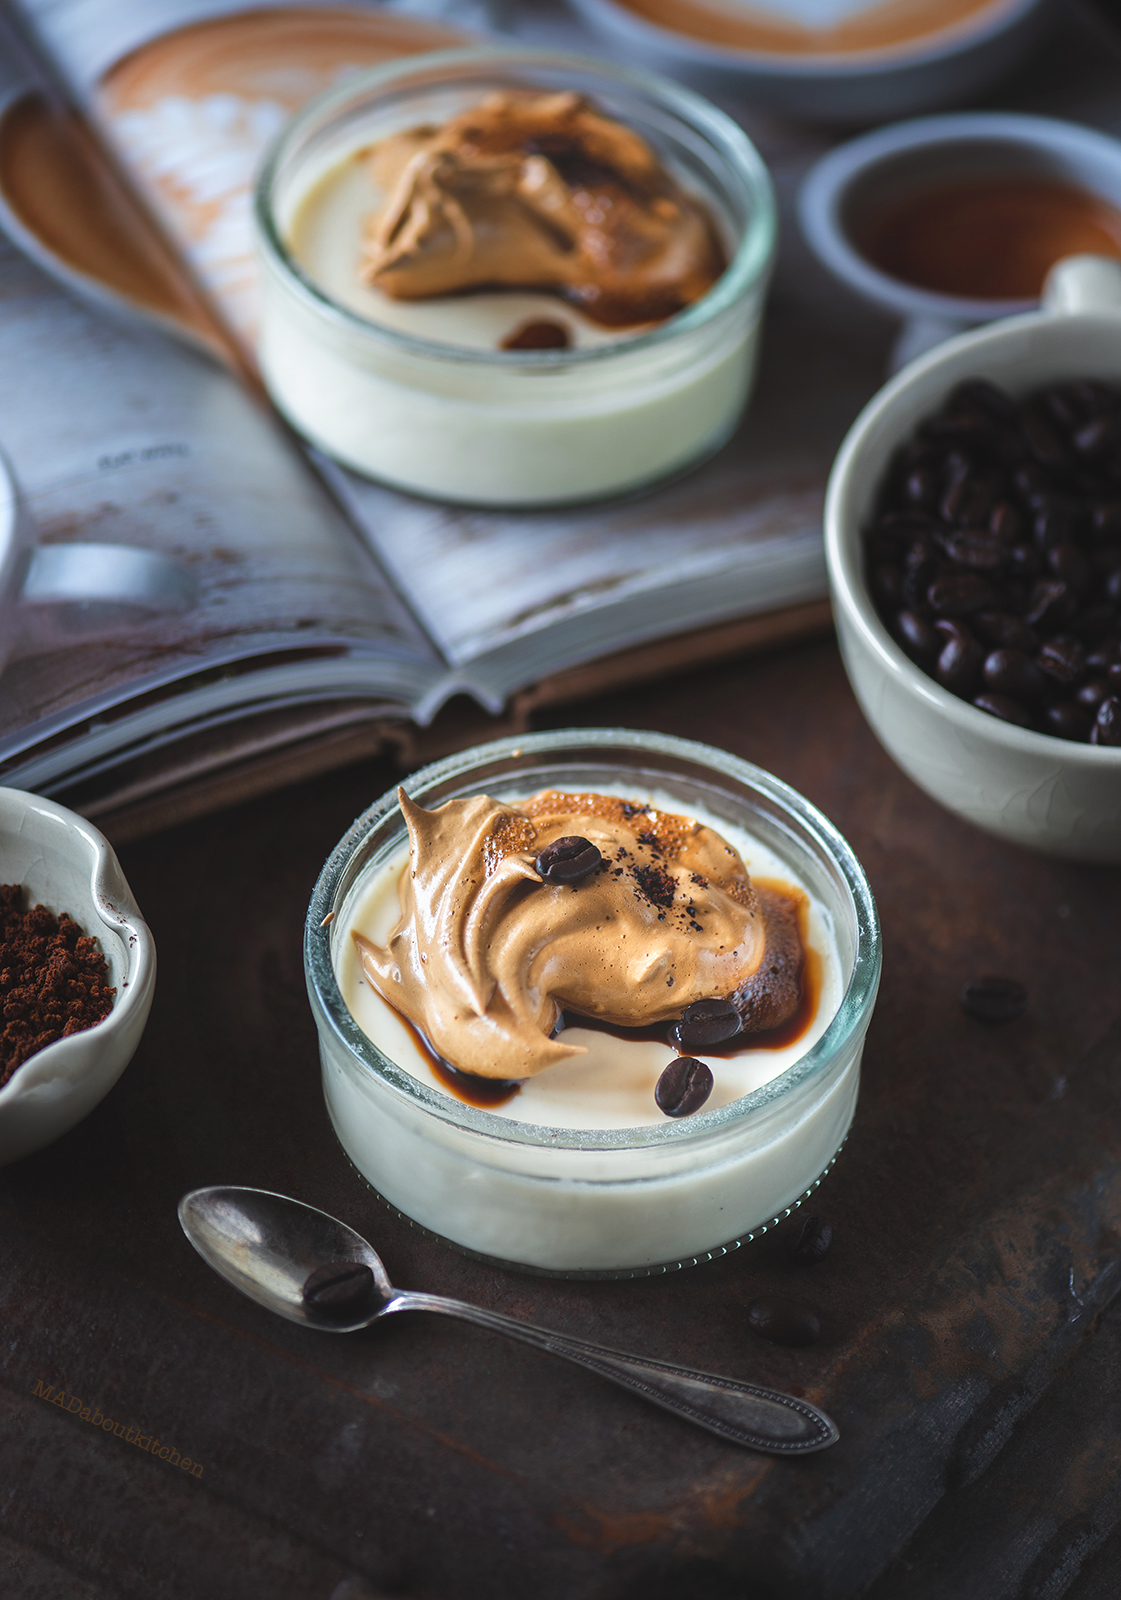 Dalgona Coffee Panacotta is a variation of the Dalgona Coffee or the whipped coffee. This is vanilla coffee topped with whipped coffee.